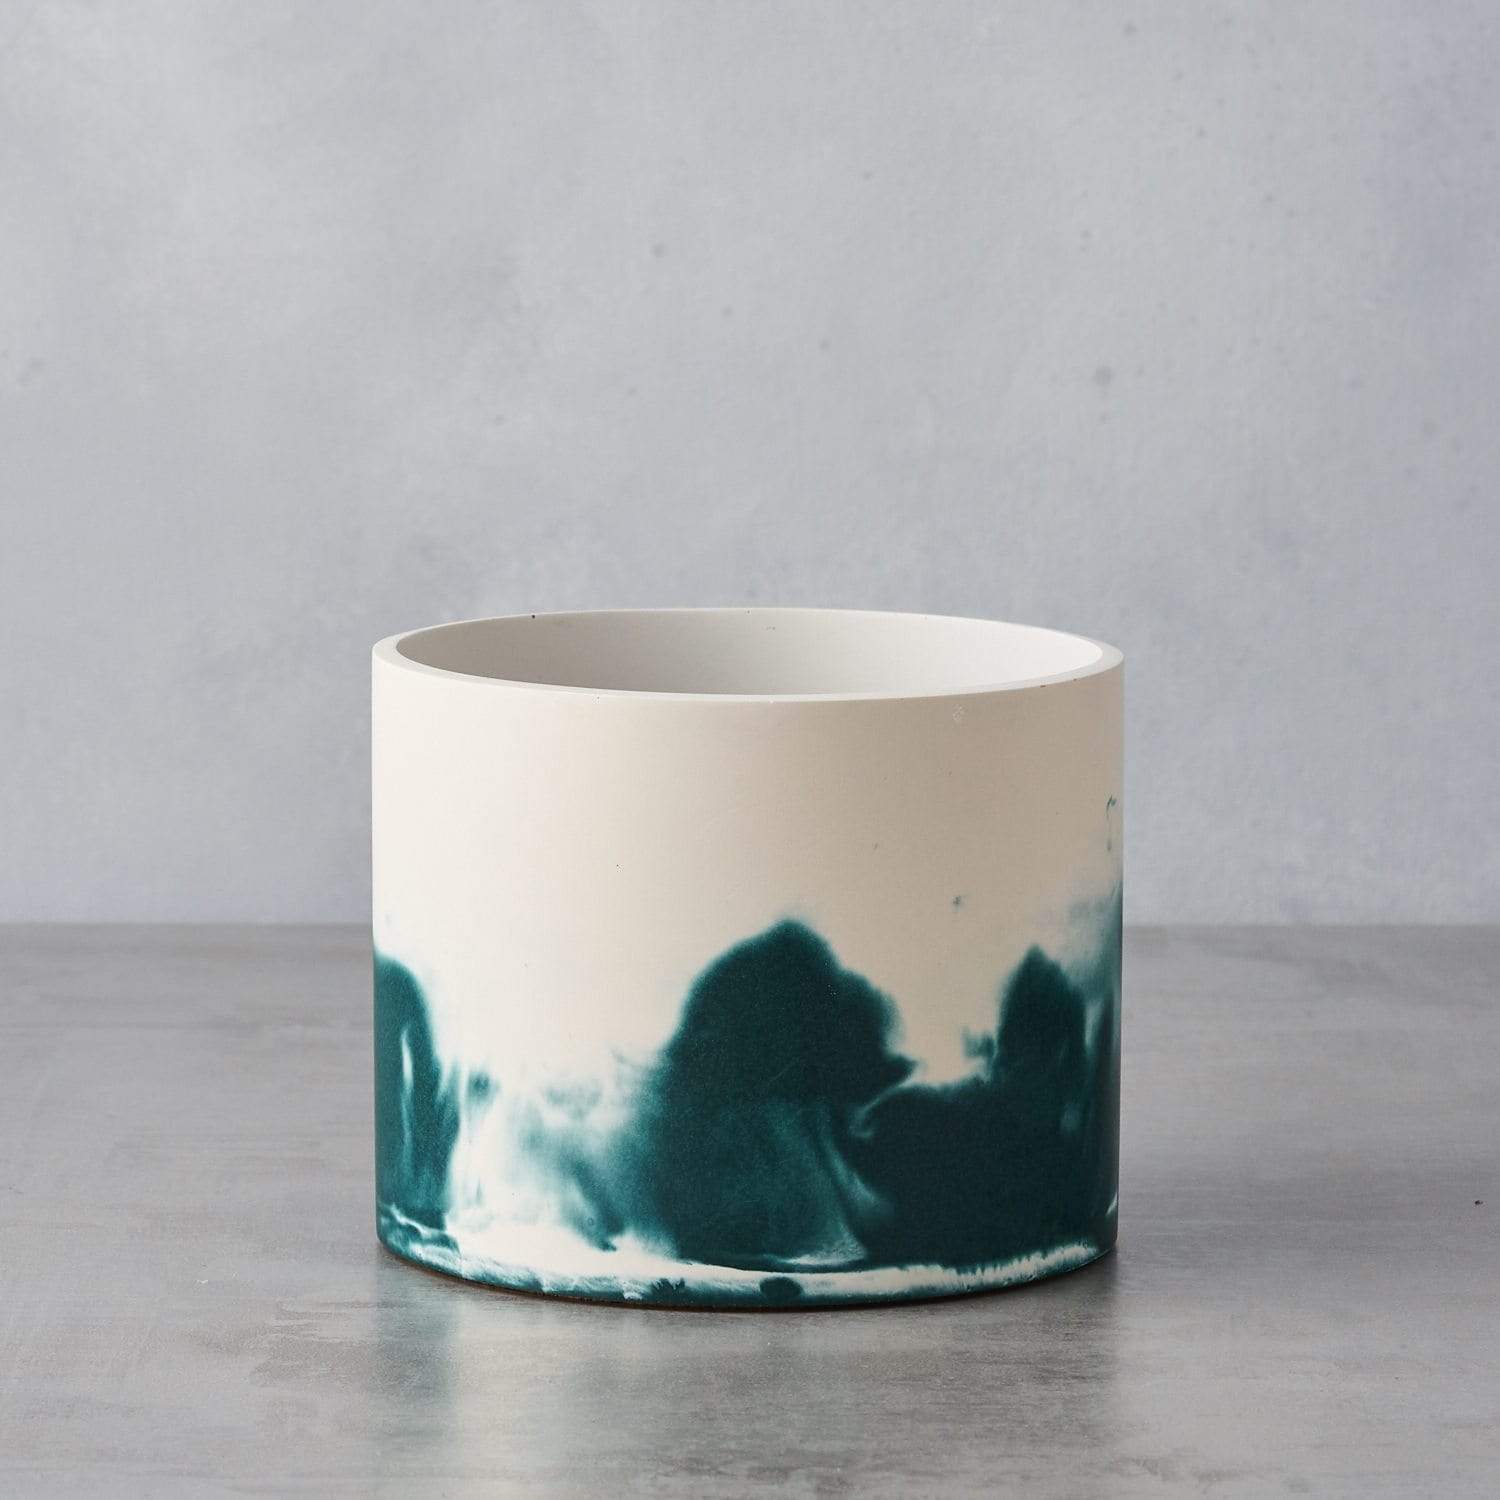 Tip Studio Vessel White and green pigment Medium Cylinder Vessel (various colours)